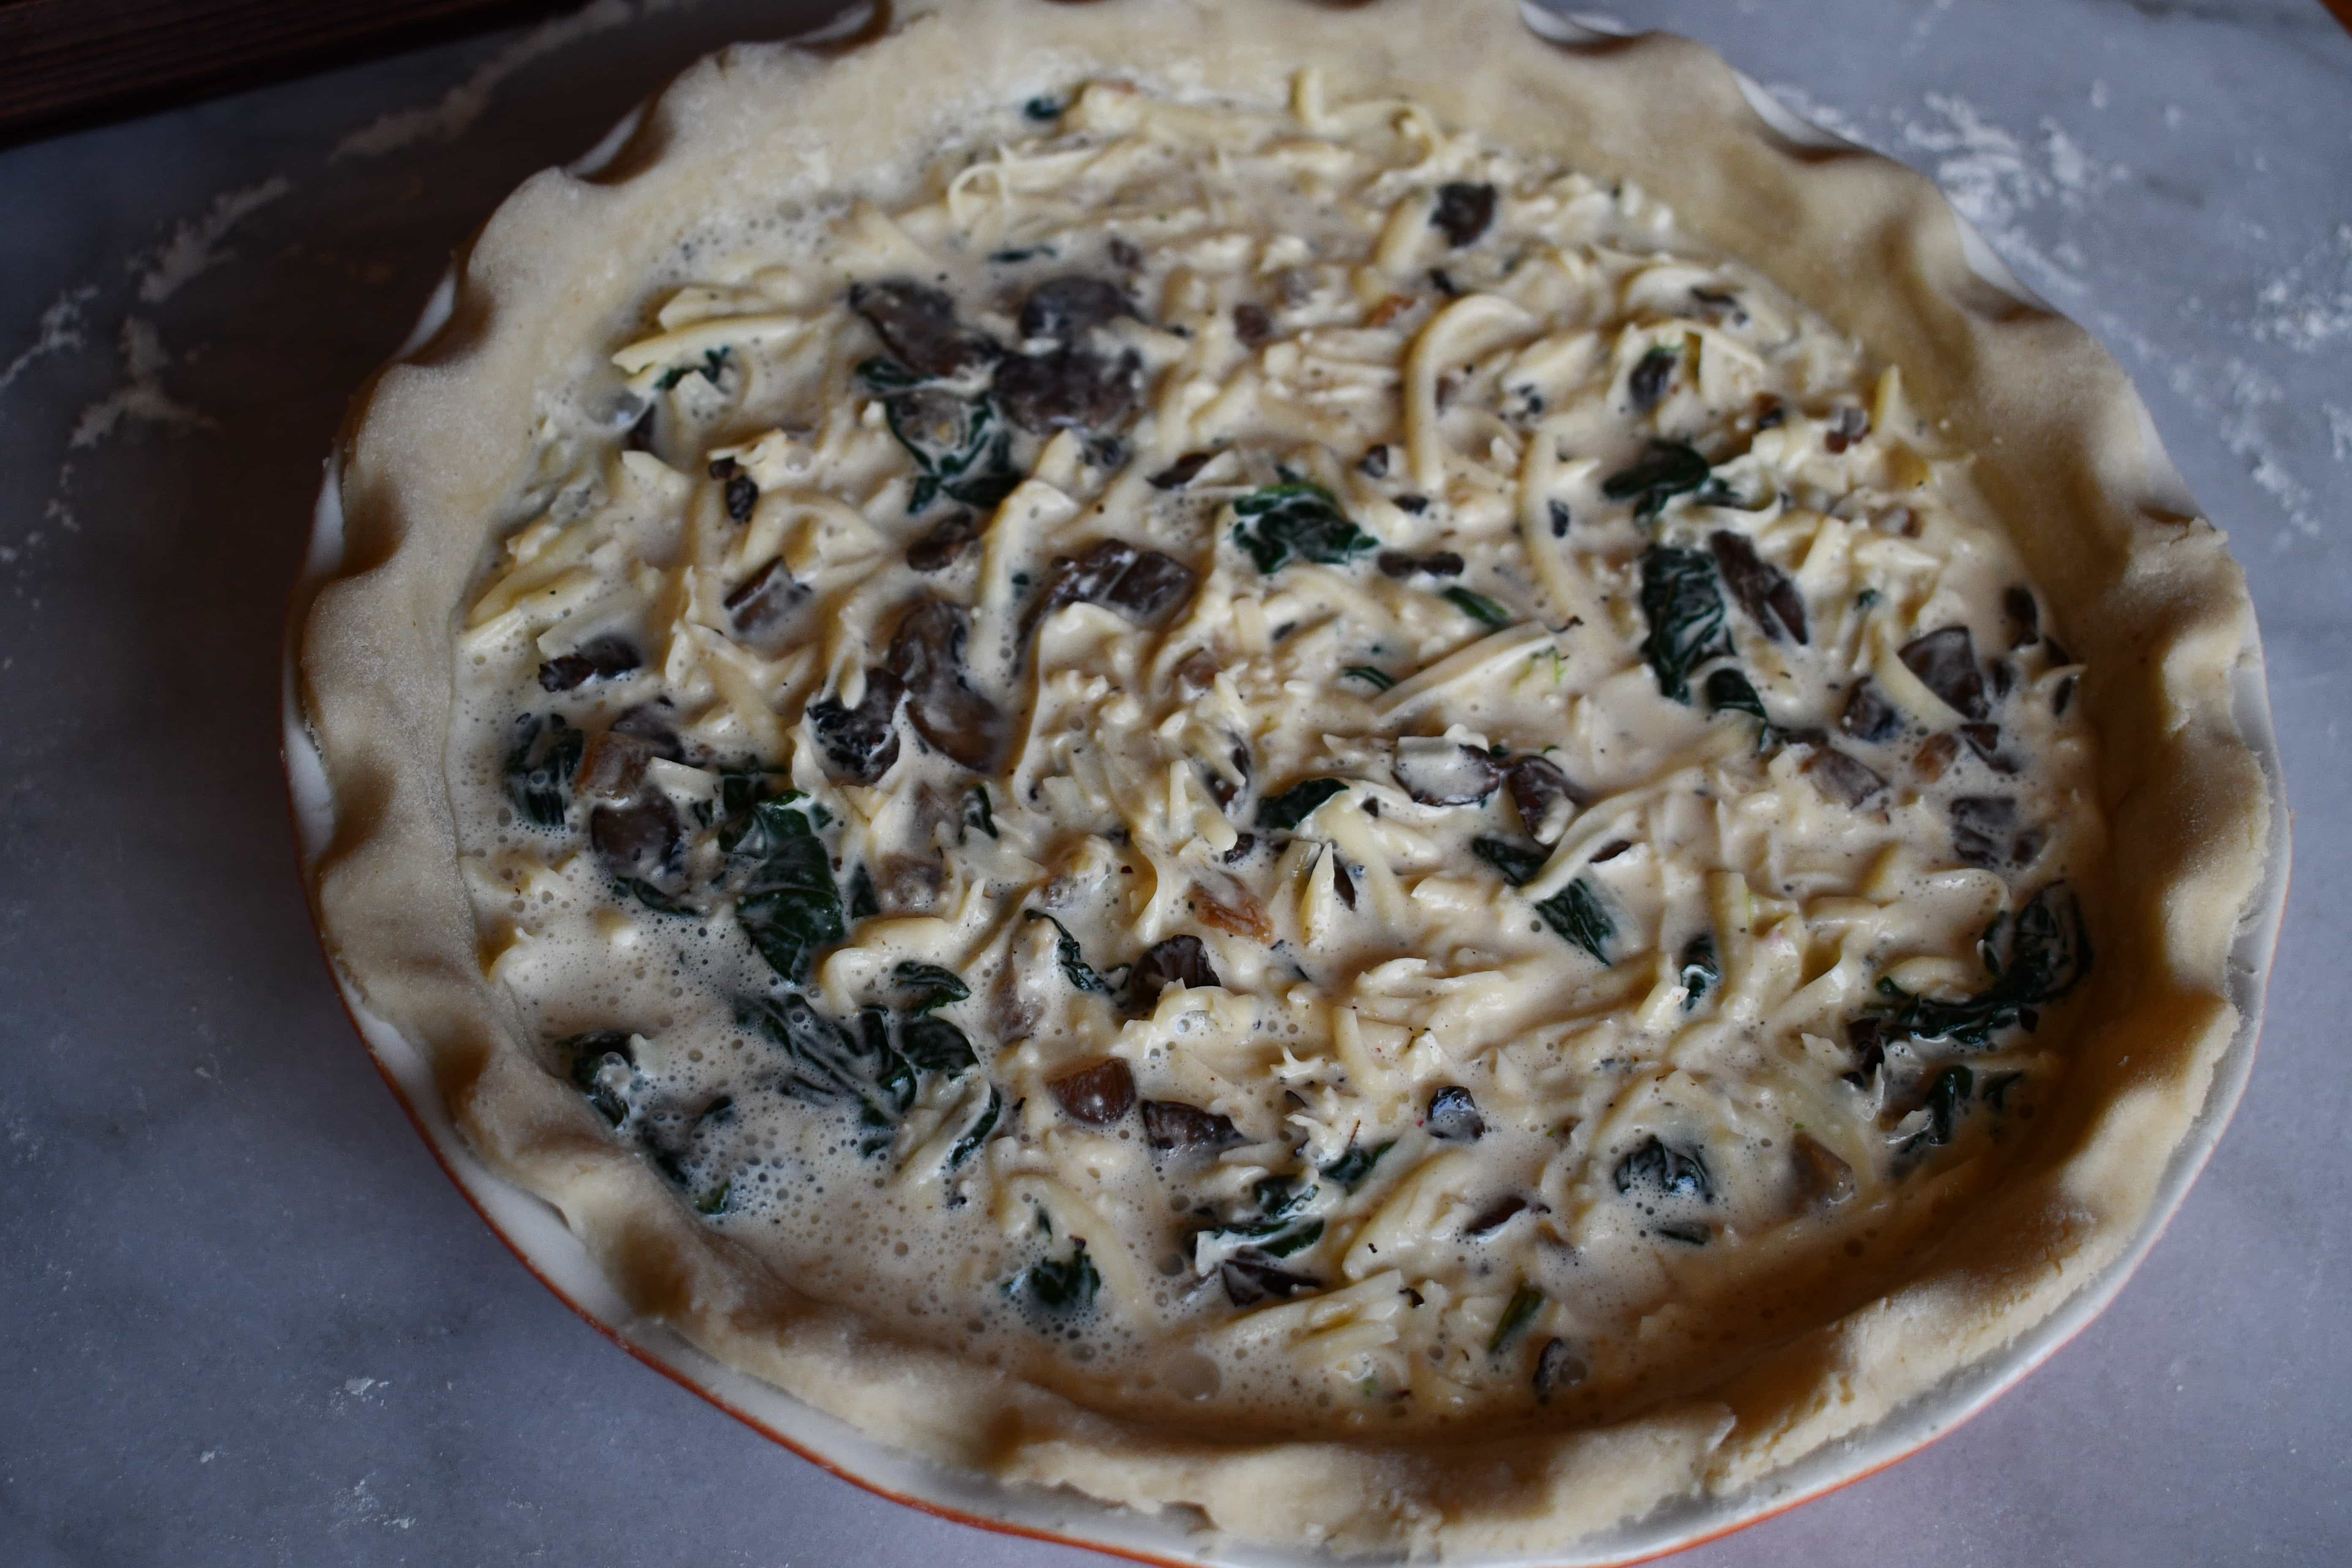 Joanna Gaines Mushroom, Spinach and Swiss Cheese Quiche